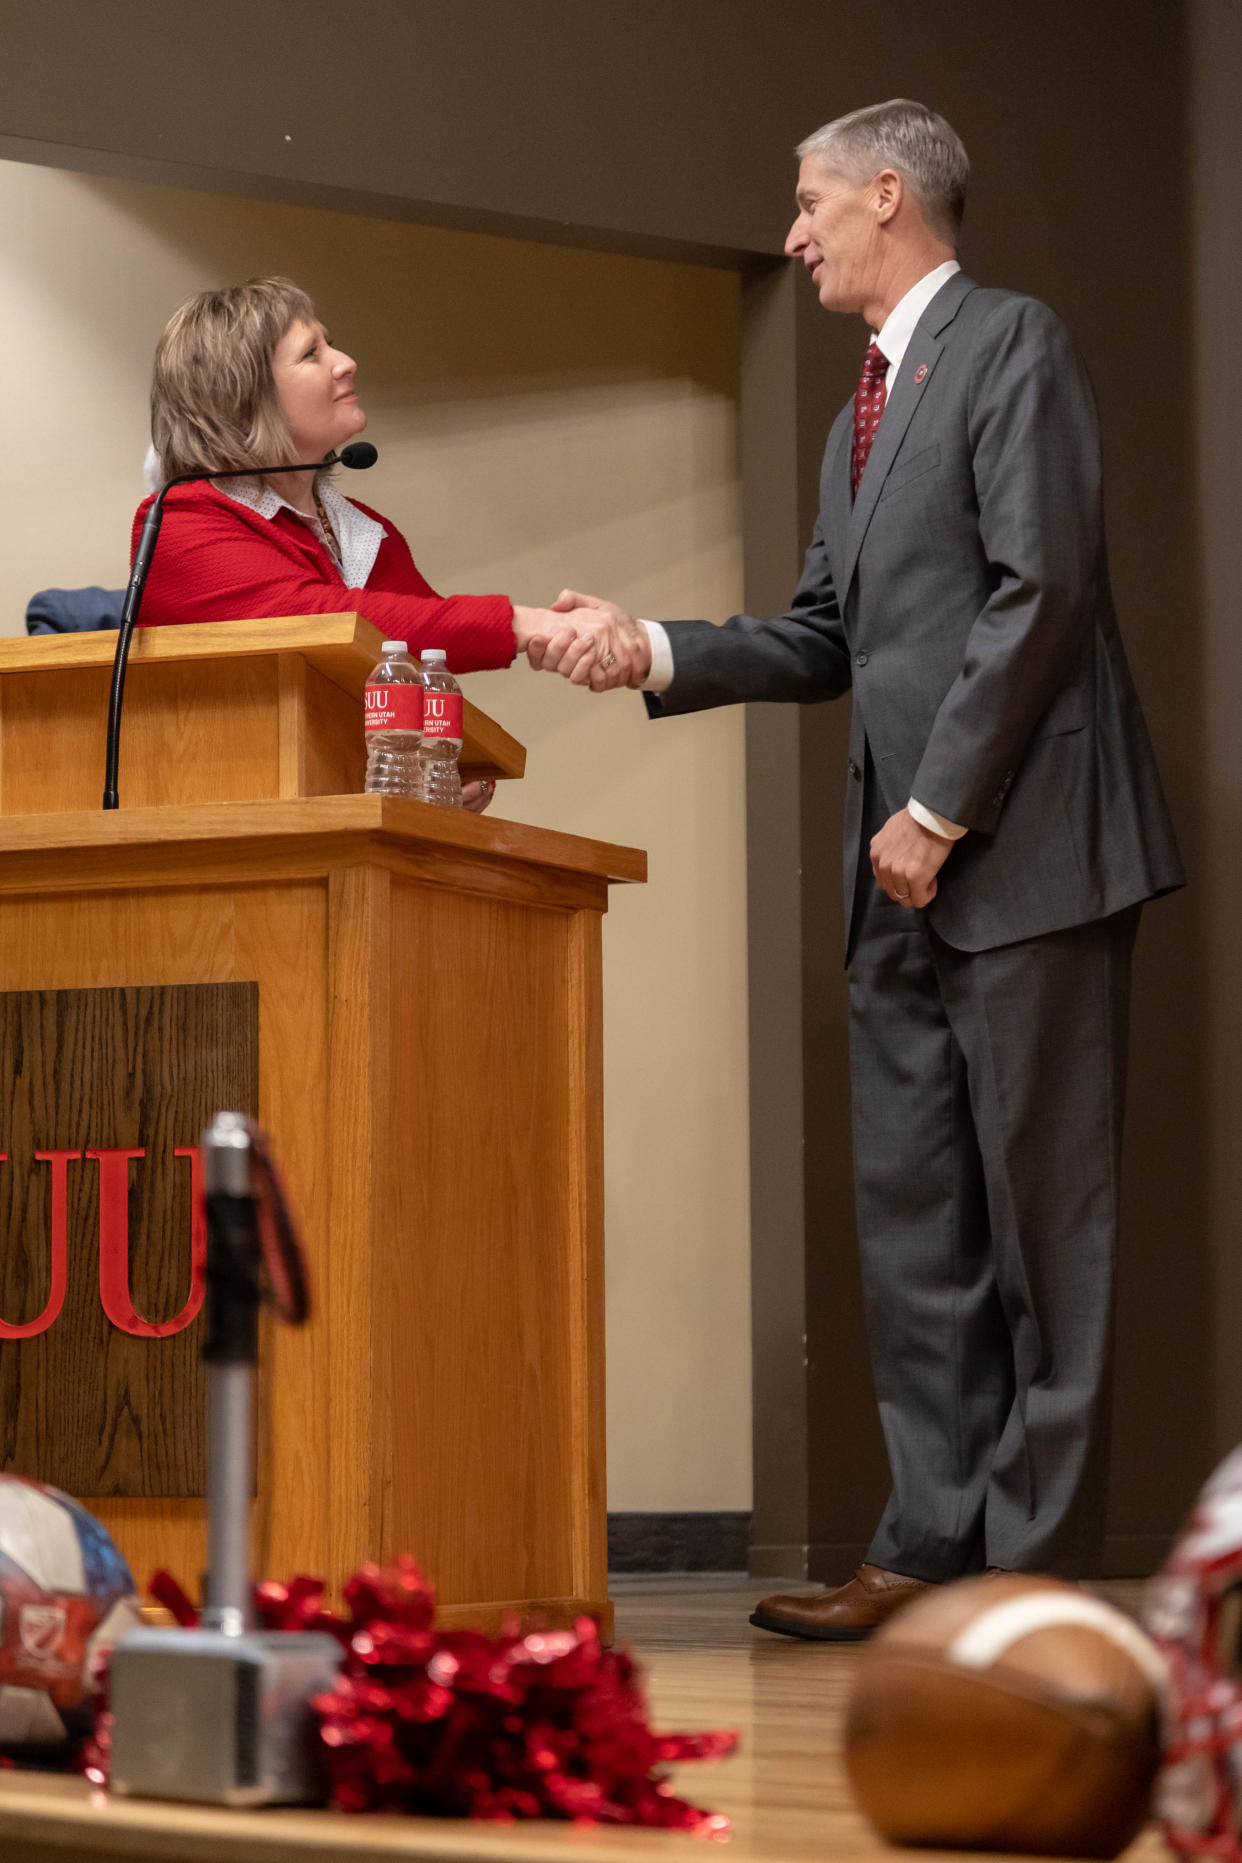 Southern Utah University President Mindy Benson shakes hands with Doug Knuth during a press conference to announce that he would become the school’s new athletic director.